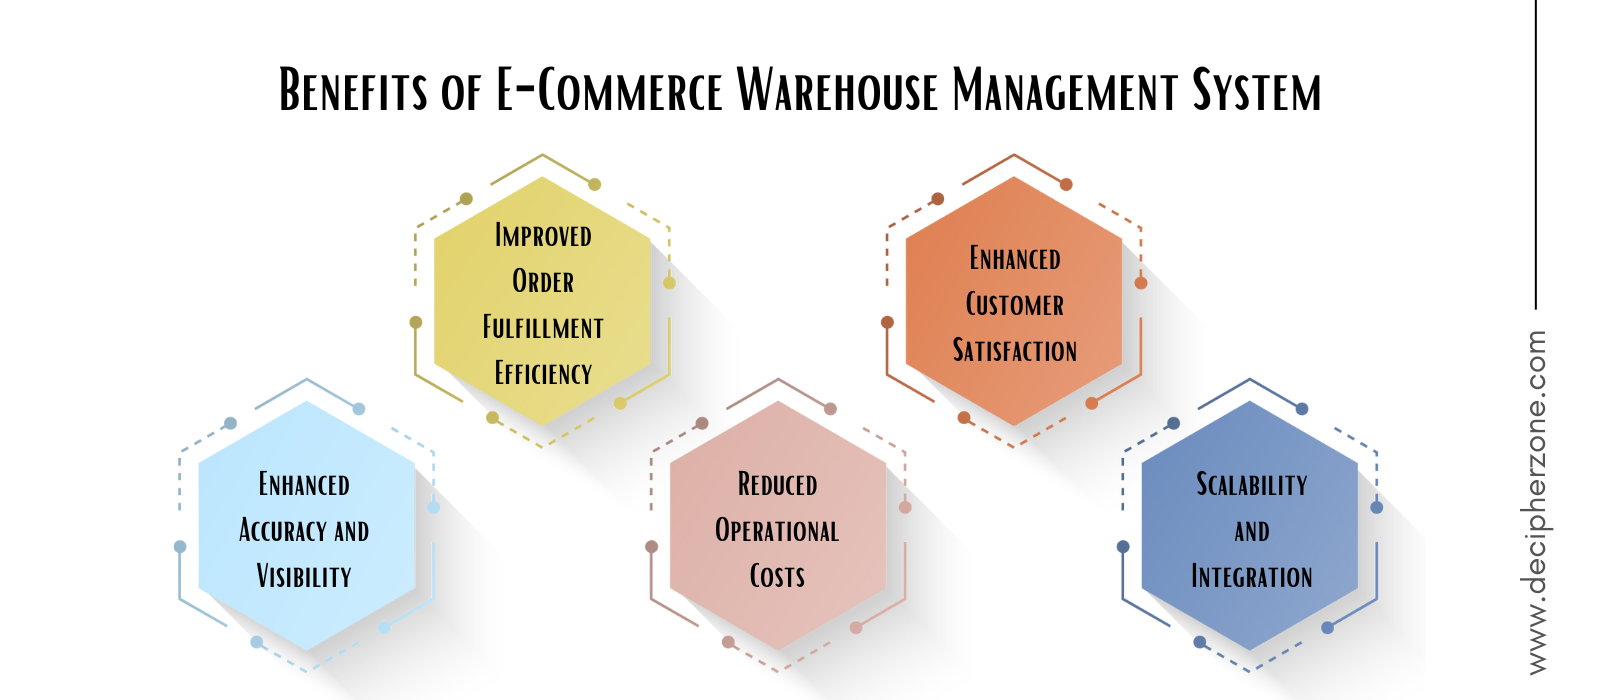 Benefits of E-Commerce Warehouse Management System